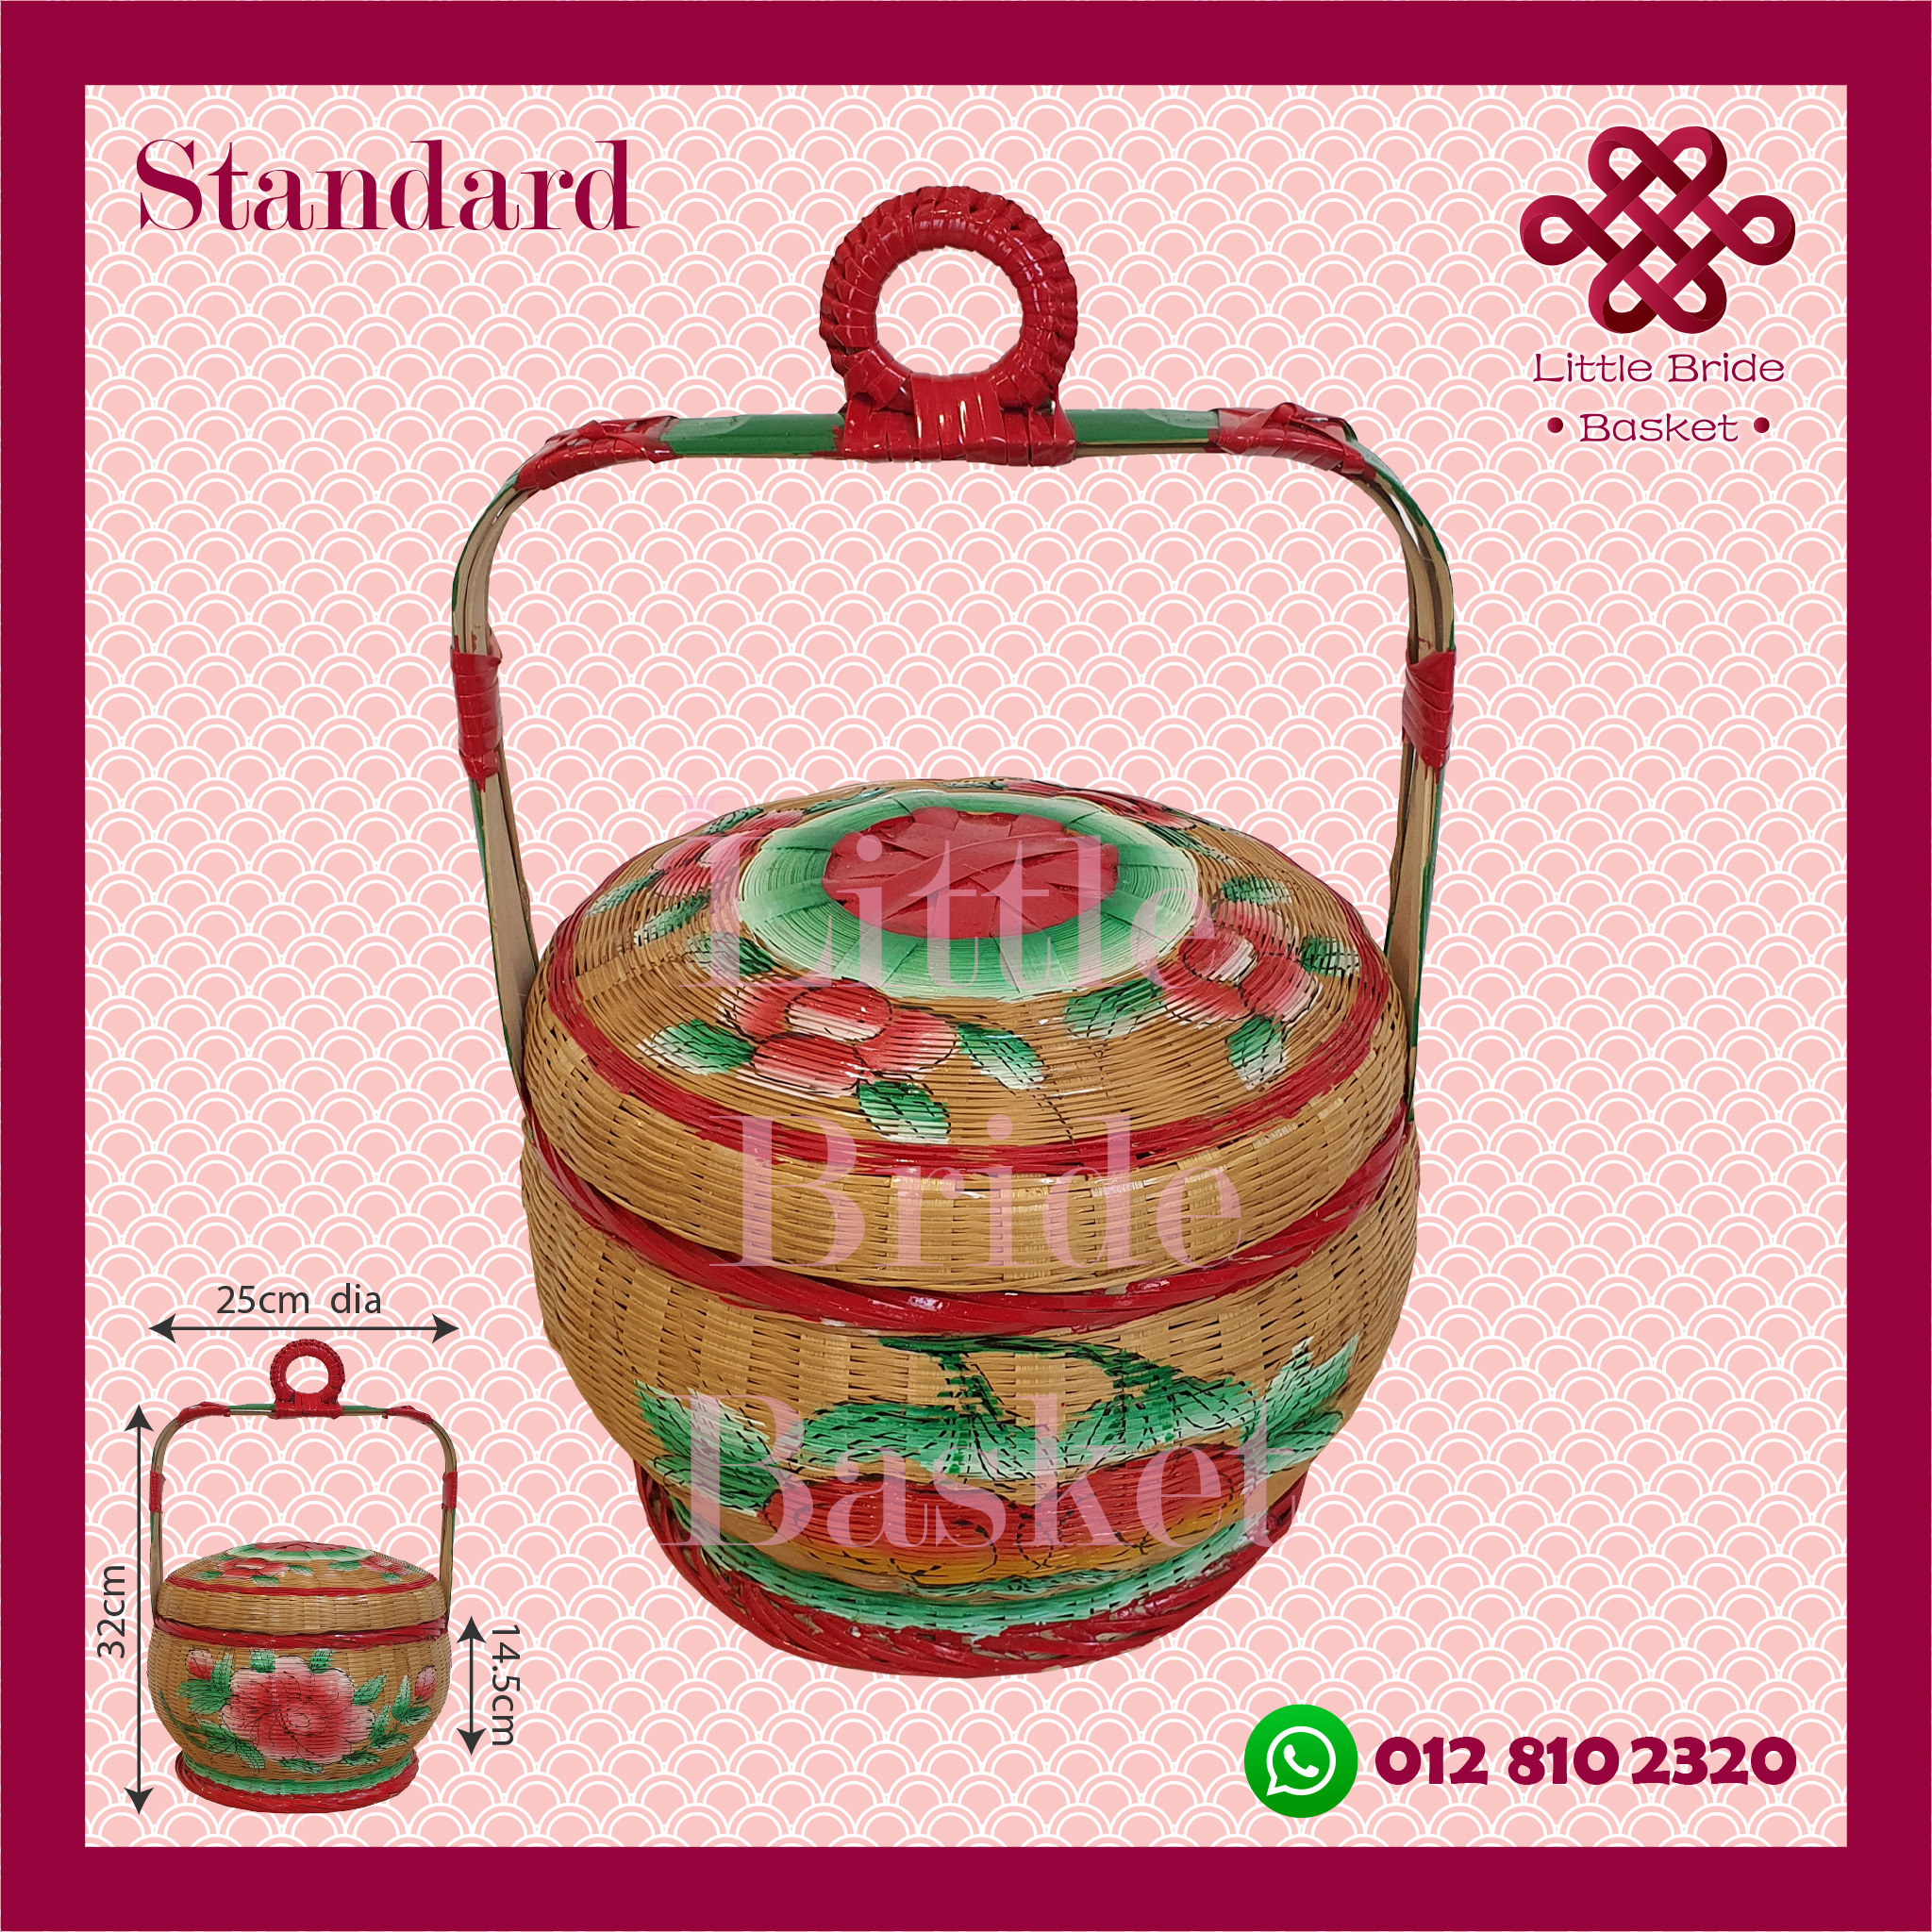 Standard Traditional Handcrafted Wedding Basket for Rent | Props | RentSmart Asia | Renting Is The New Buying